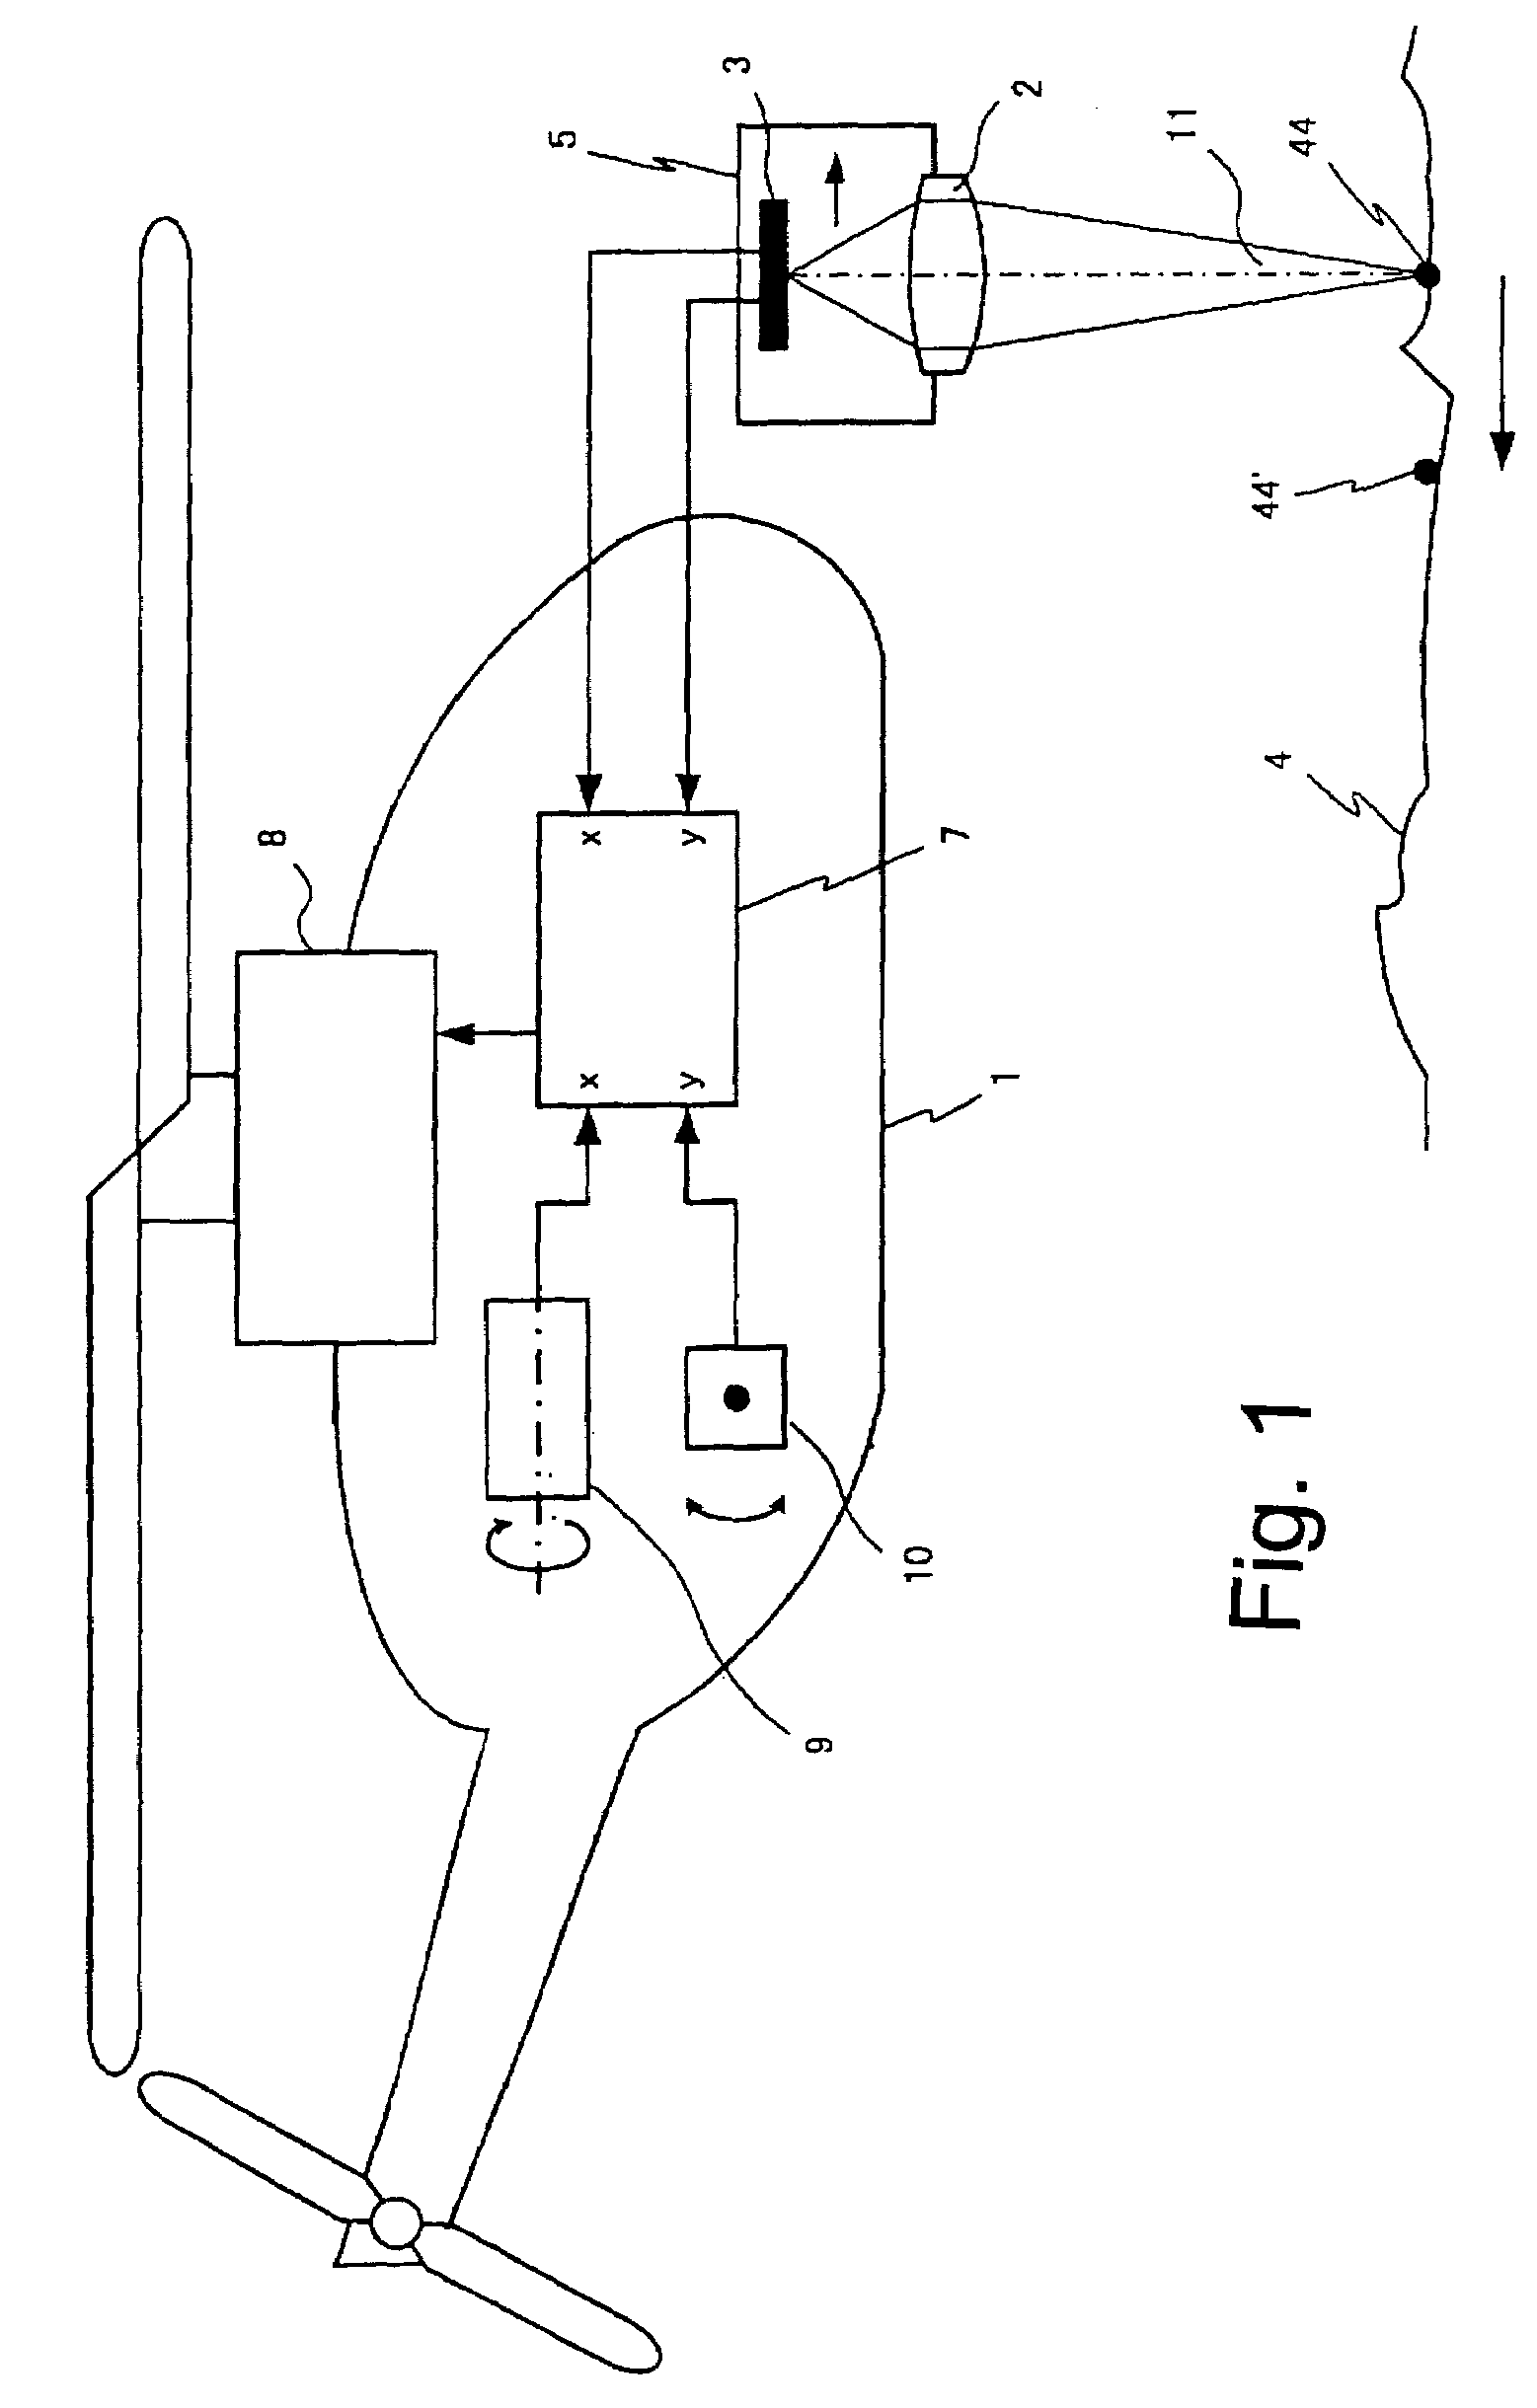 Optical sensing system and system for stabilizing machine-controllable vehicles